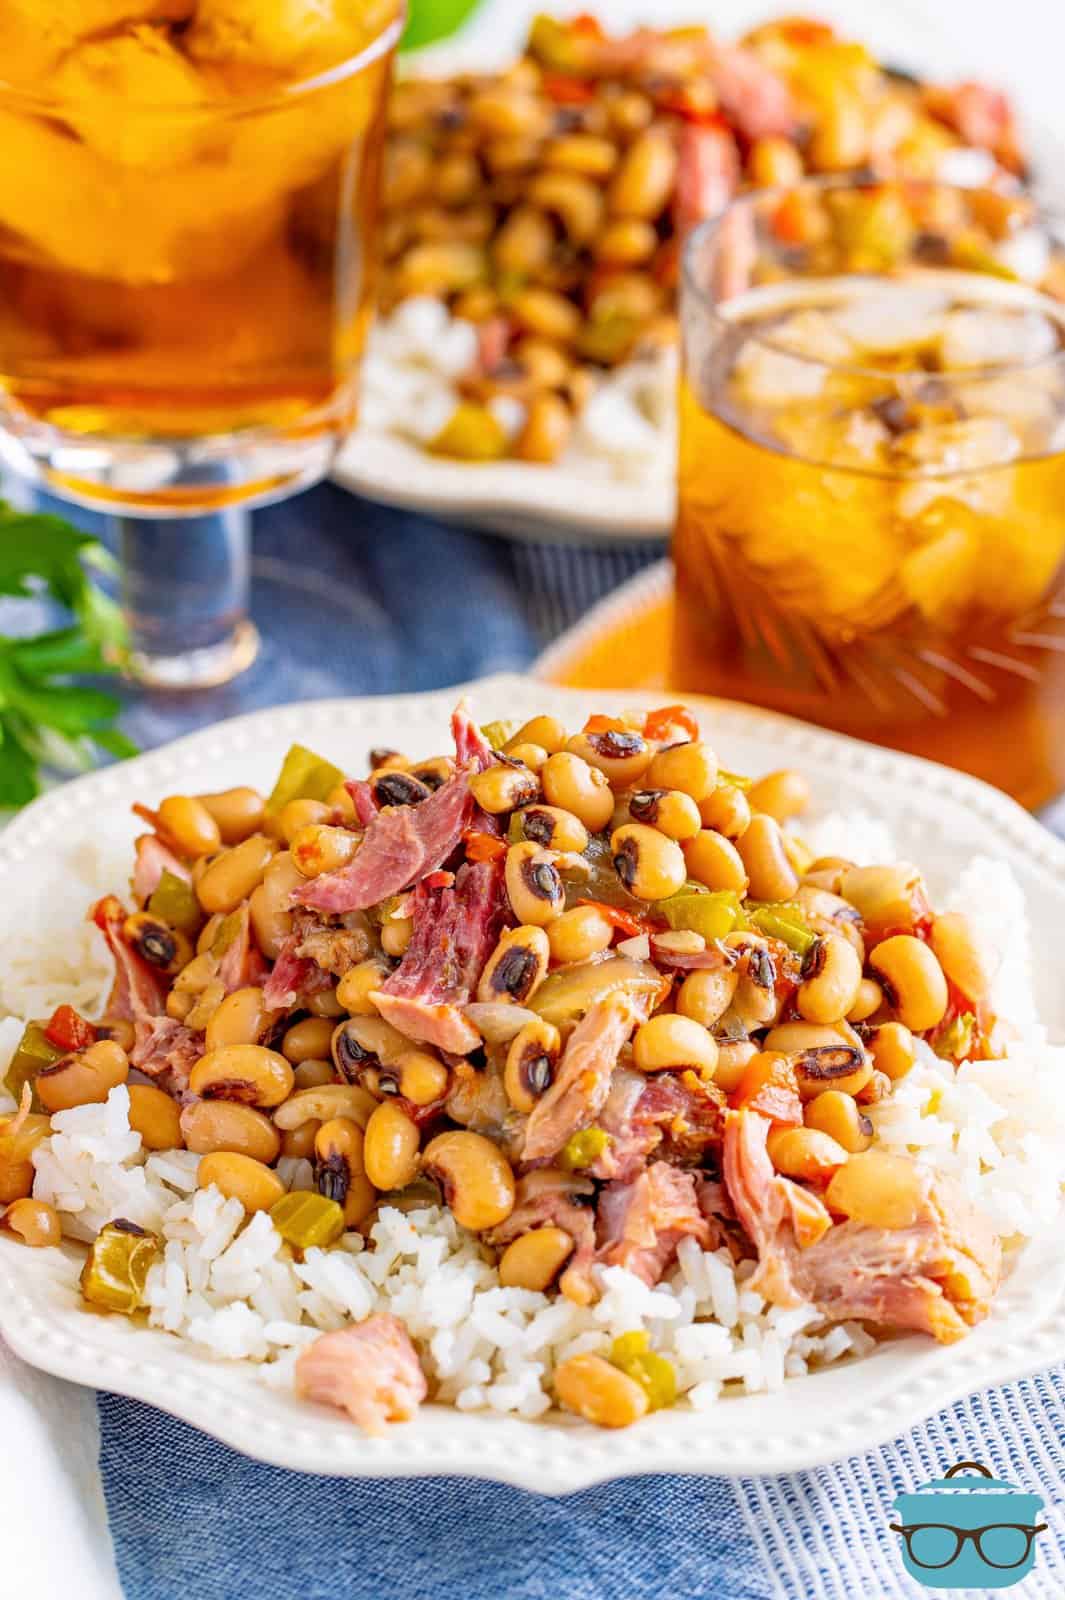 black eyed peas served over white rice on a white plate with a glass of iced tea in the background.